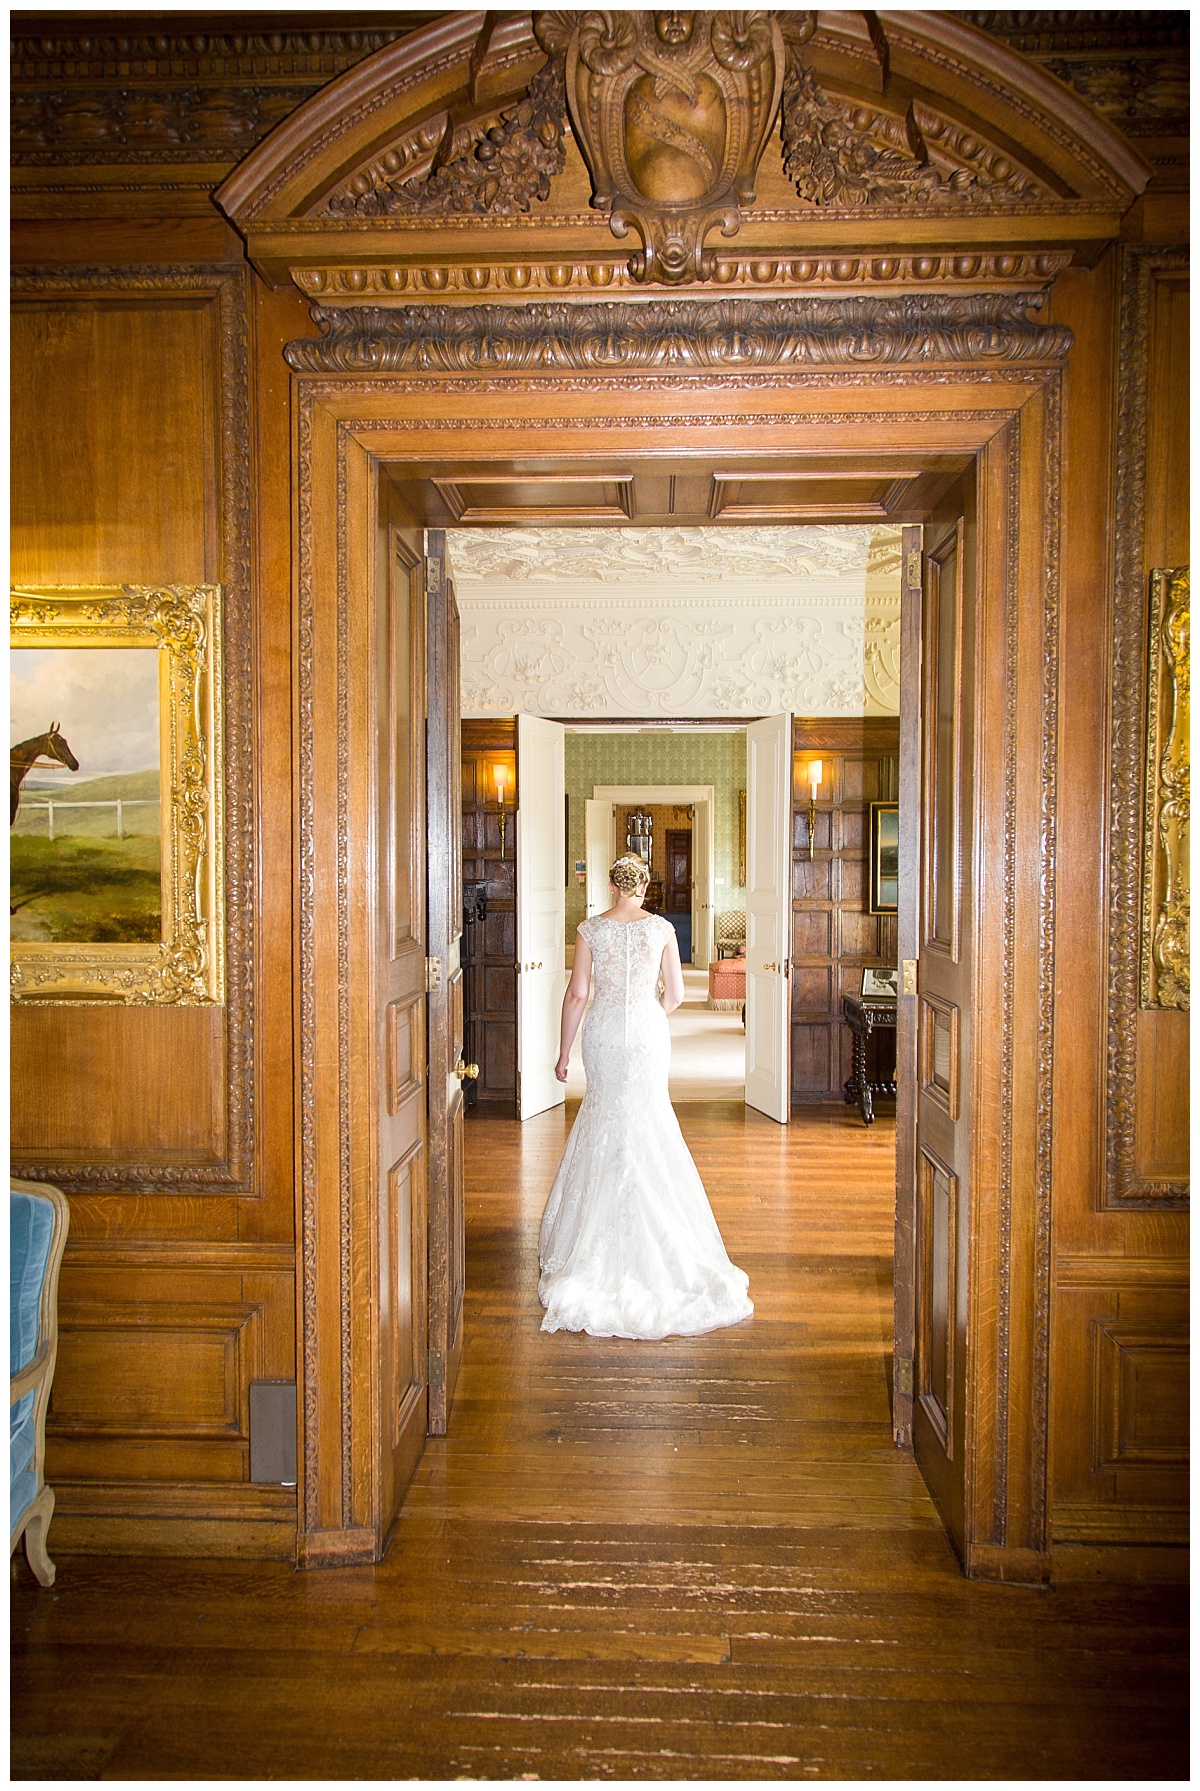 Wedding Photography Manchester - Mel and Lewis's Knowsley Hall wedding 26